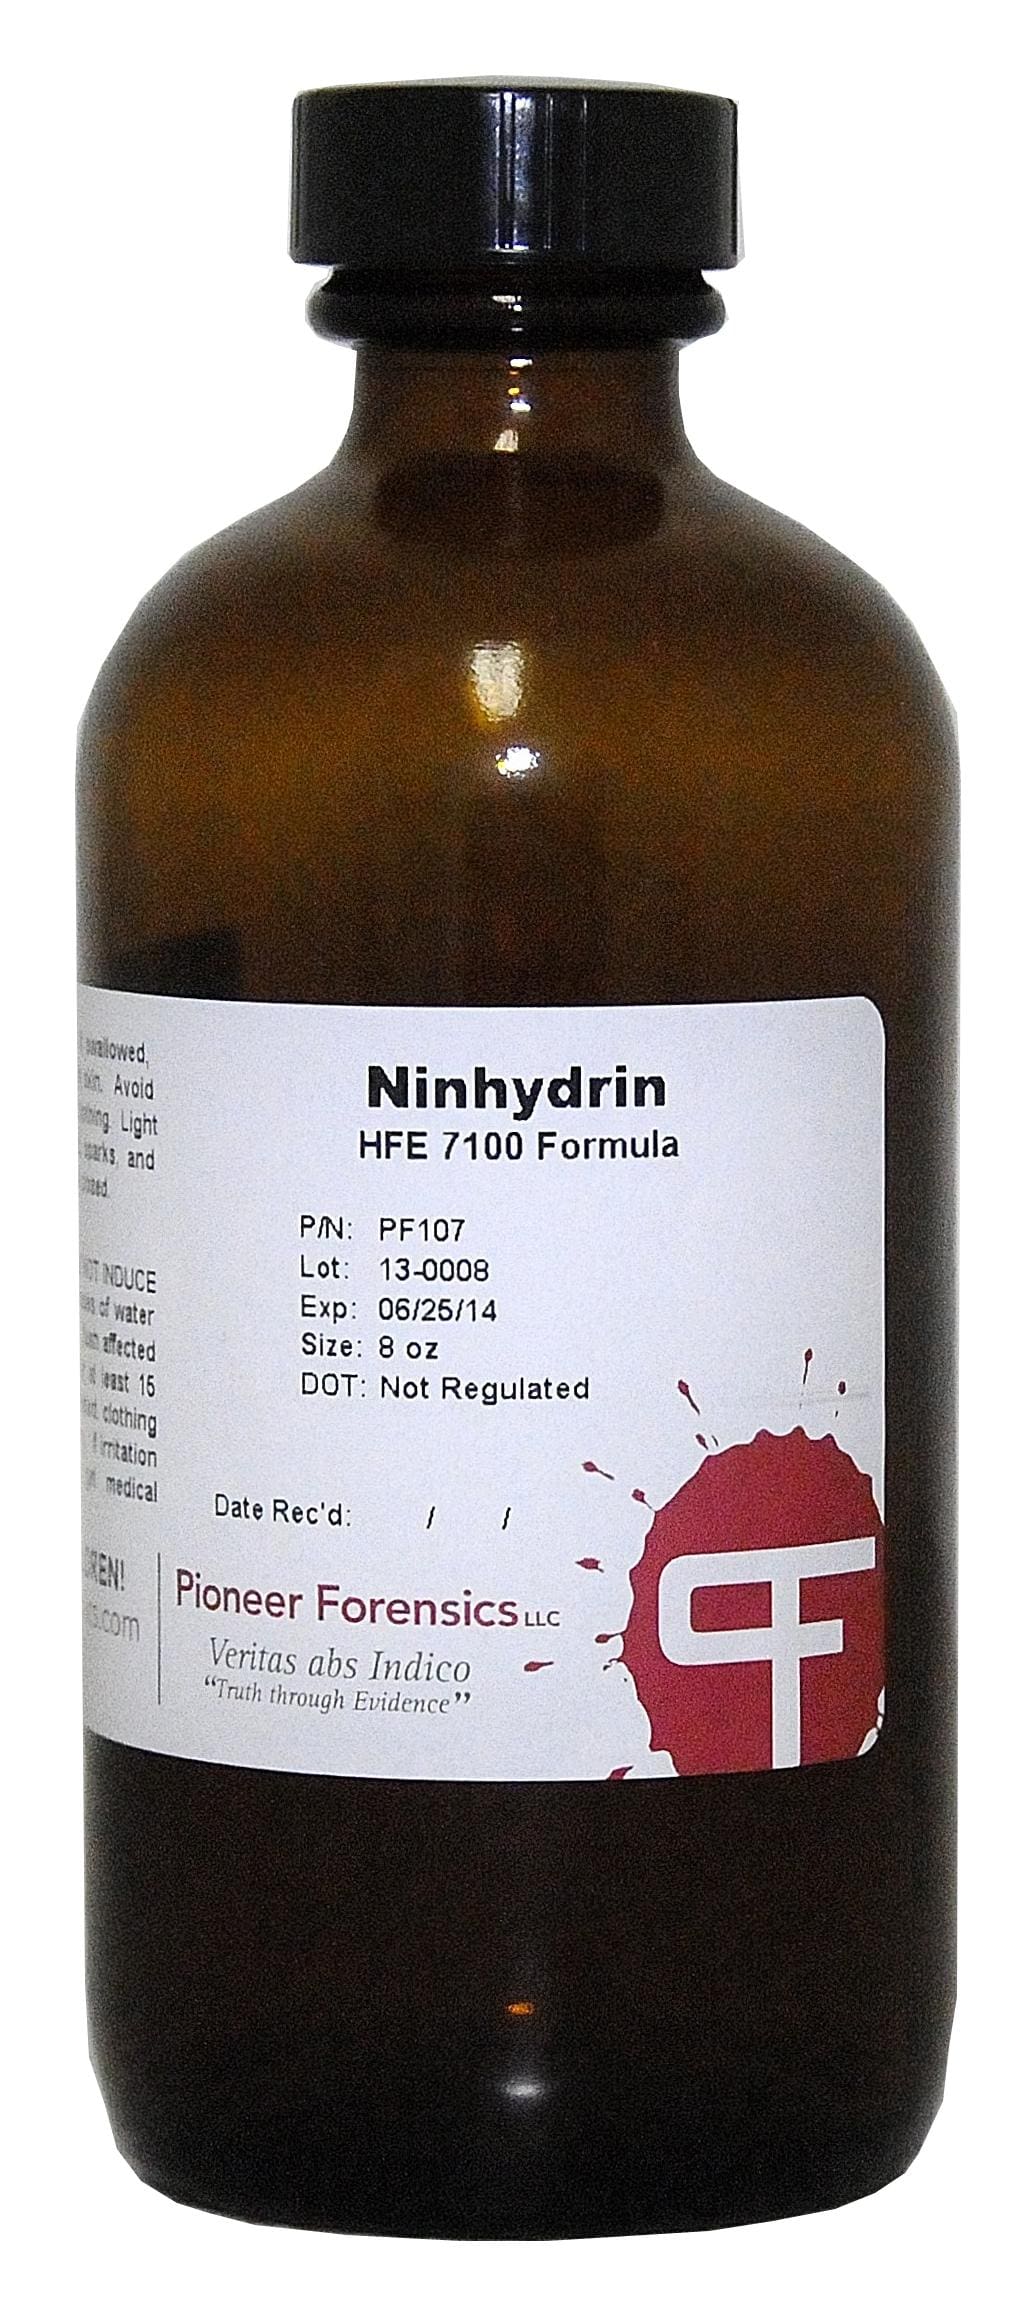 Ninhydrin is one of the easiest and most effective methods for developing latent prints on paper.